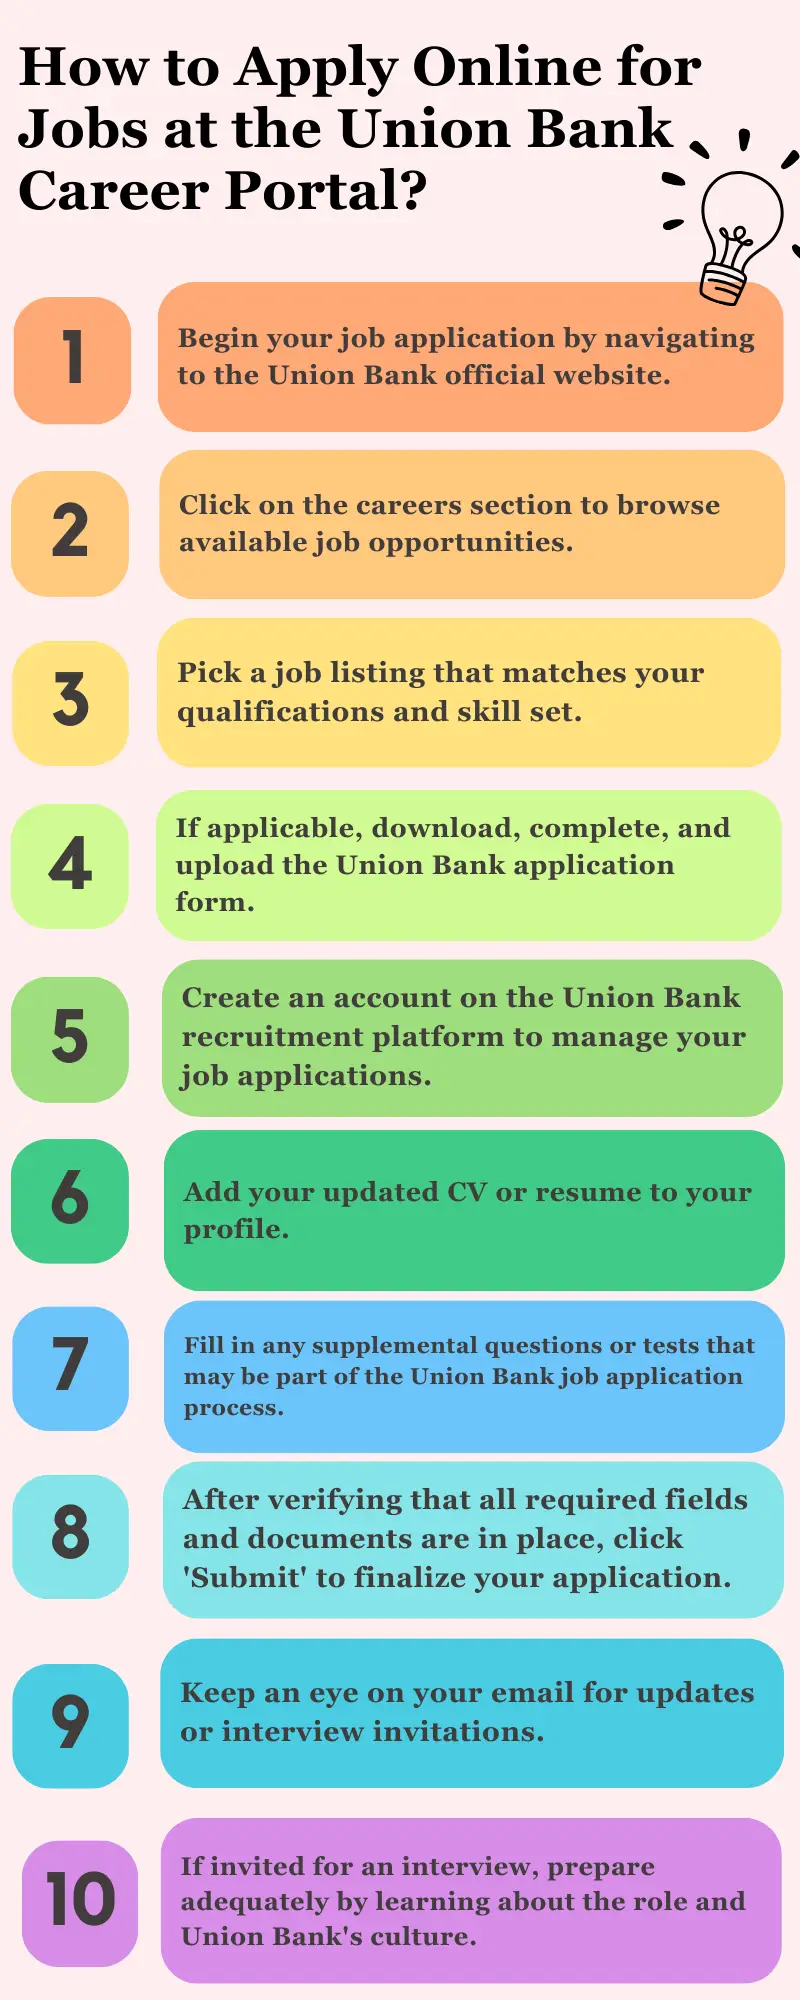 How to Apply Online for Jobs at the Union Bank Career Portal?